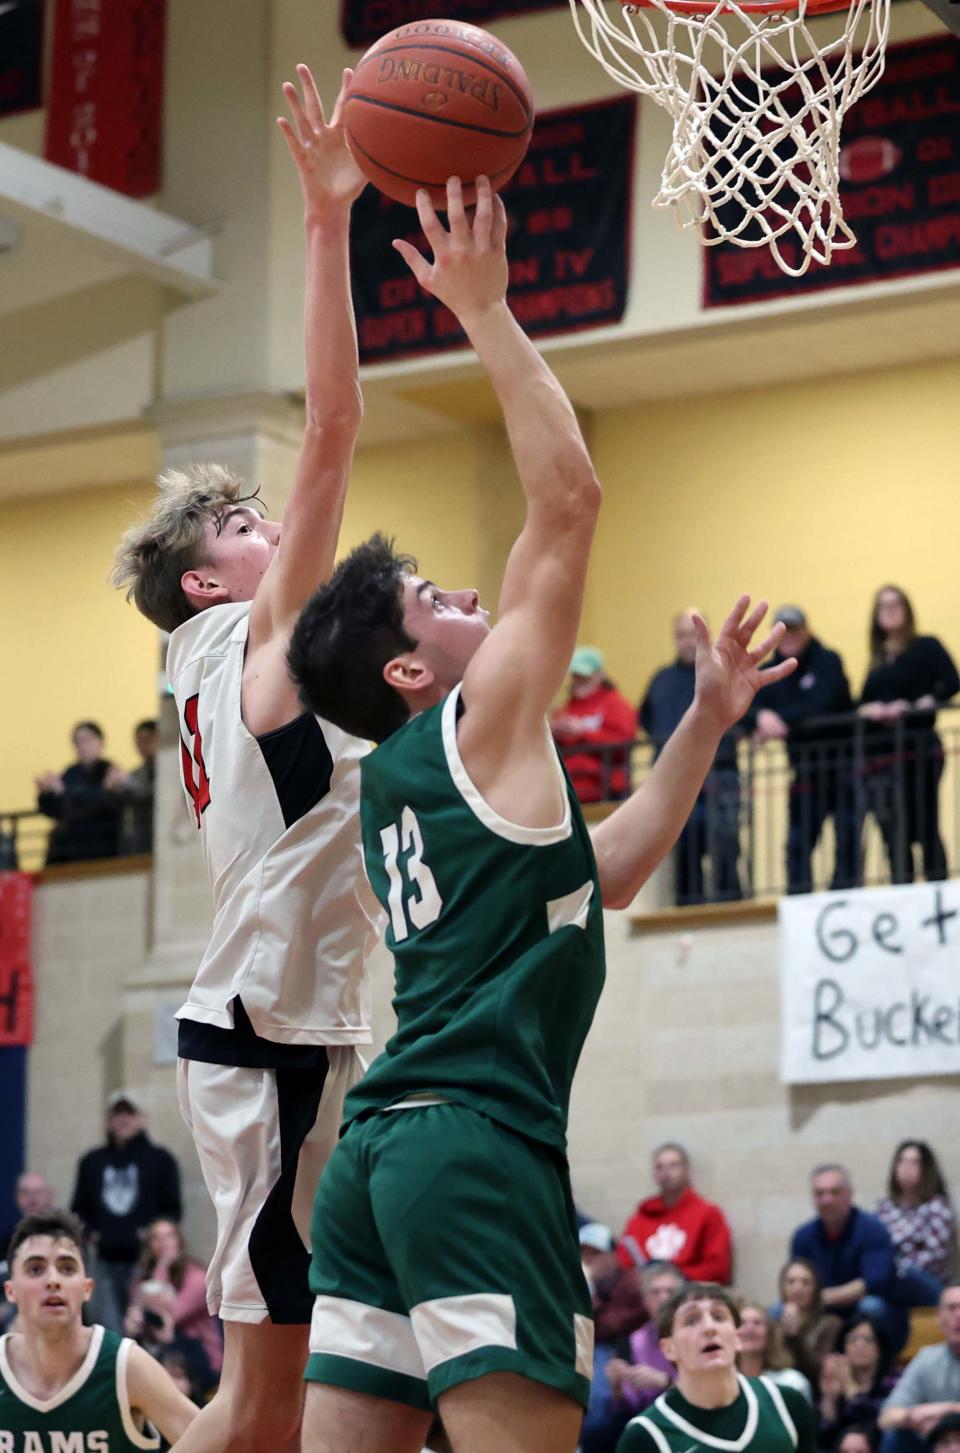 Marshfield's Jake Brilliant takes a shot at the basket on Whitman-Hanson defender Ryan Baker during a game  on Friday, Feb. 10, 2023.